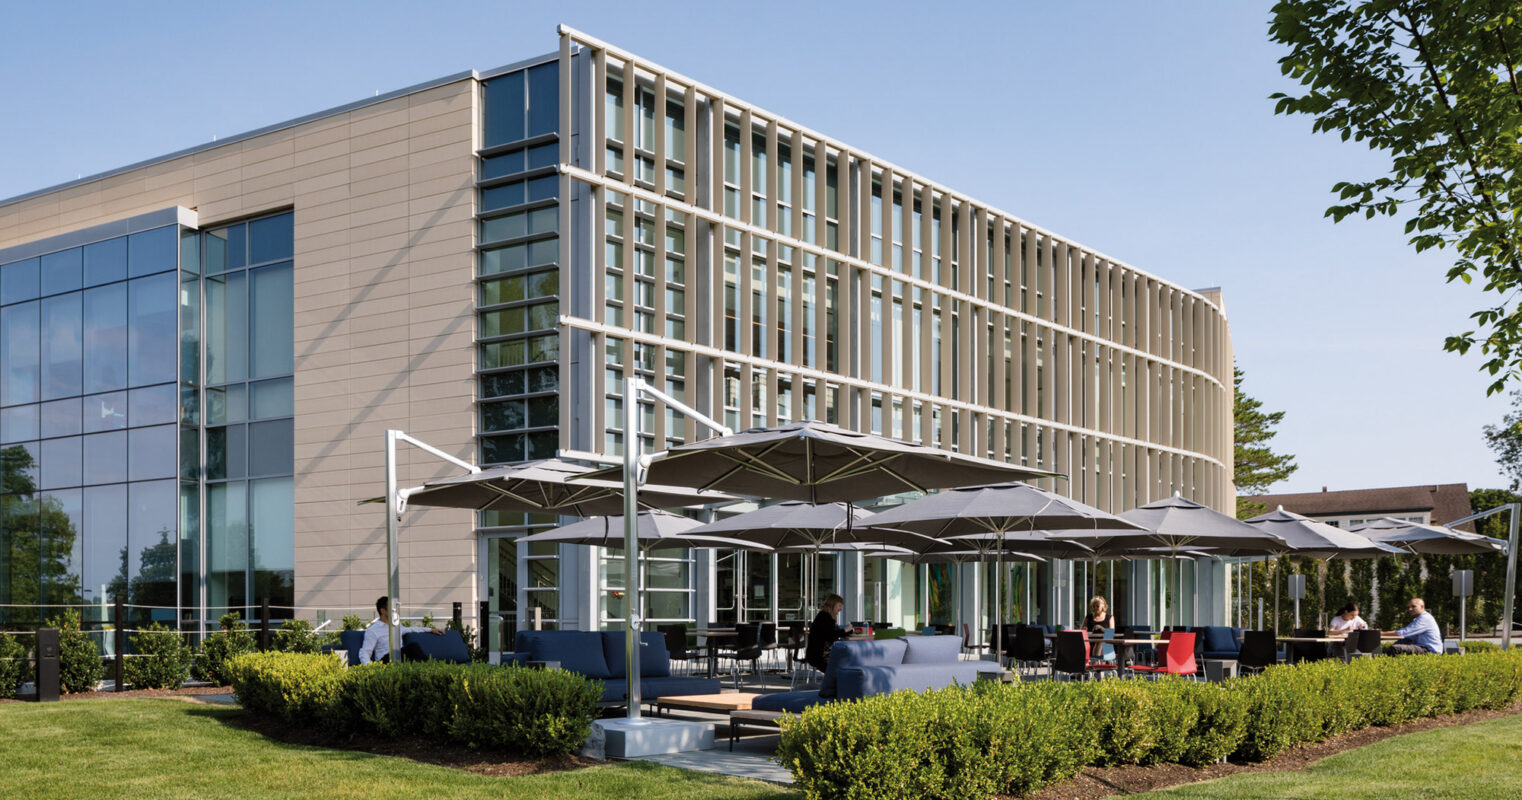 Modern office building with an outdoor seating area featuring umbrellas and tables, set amidst manicured lawns on a sunny day.